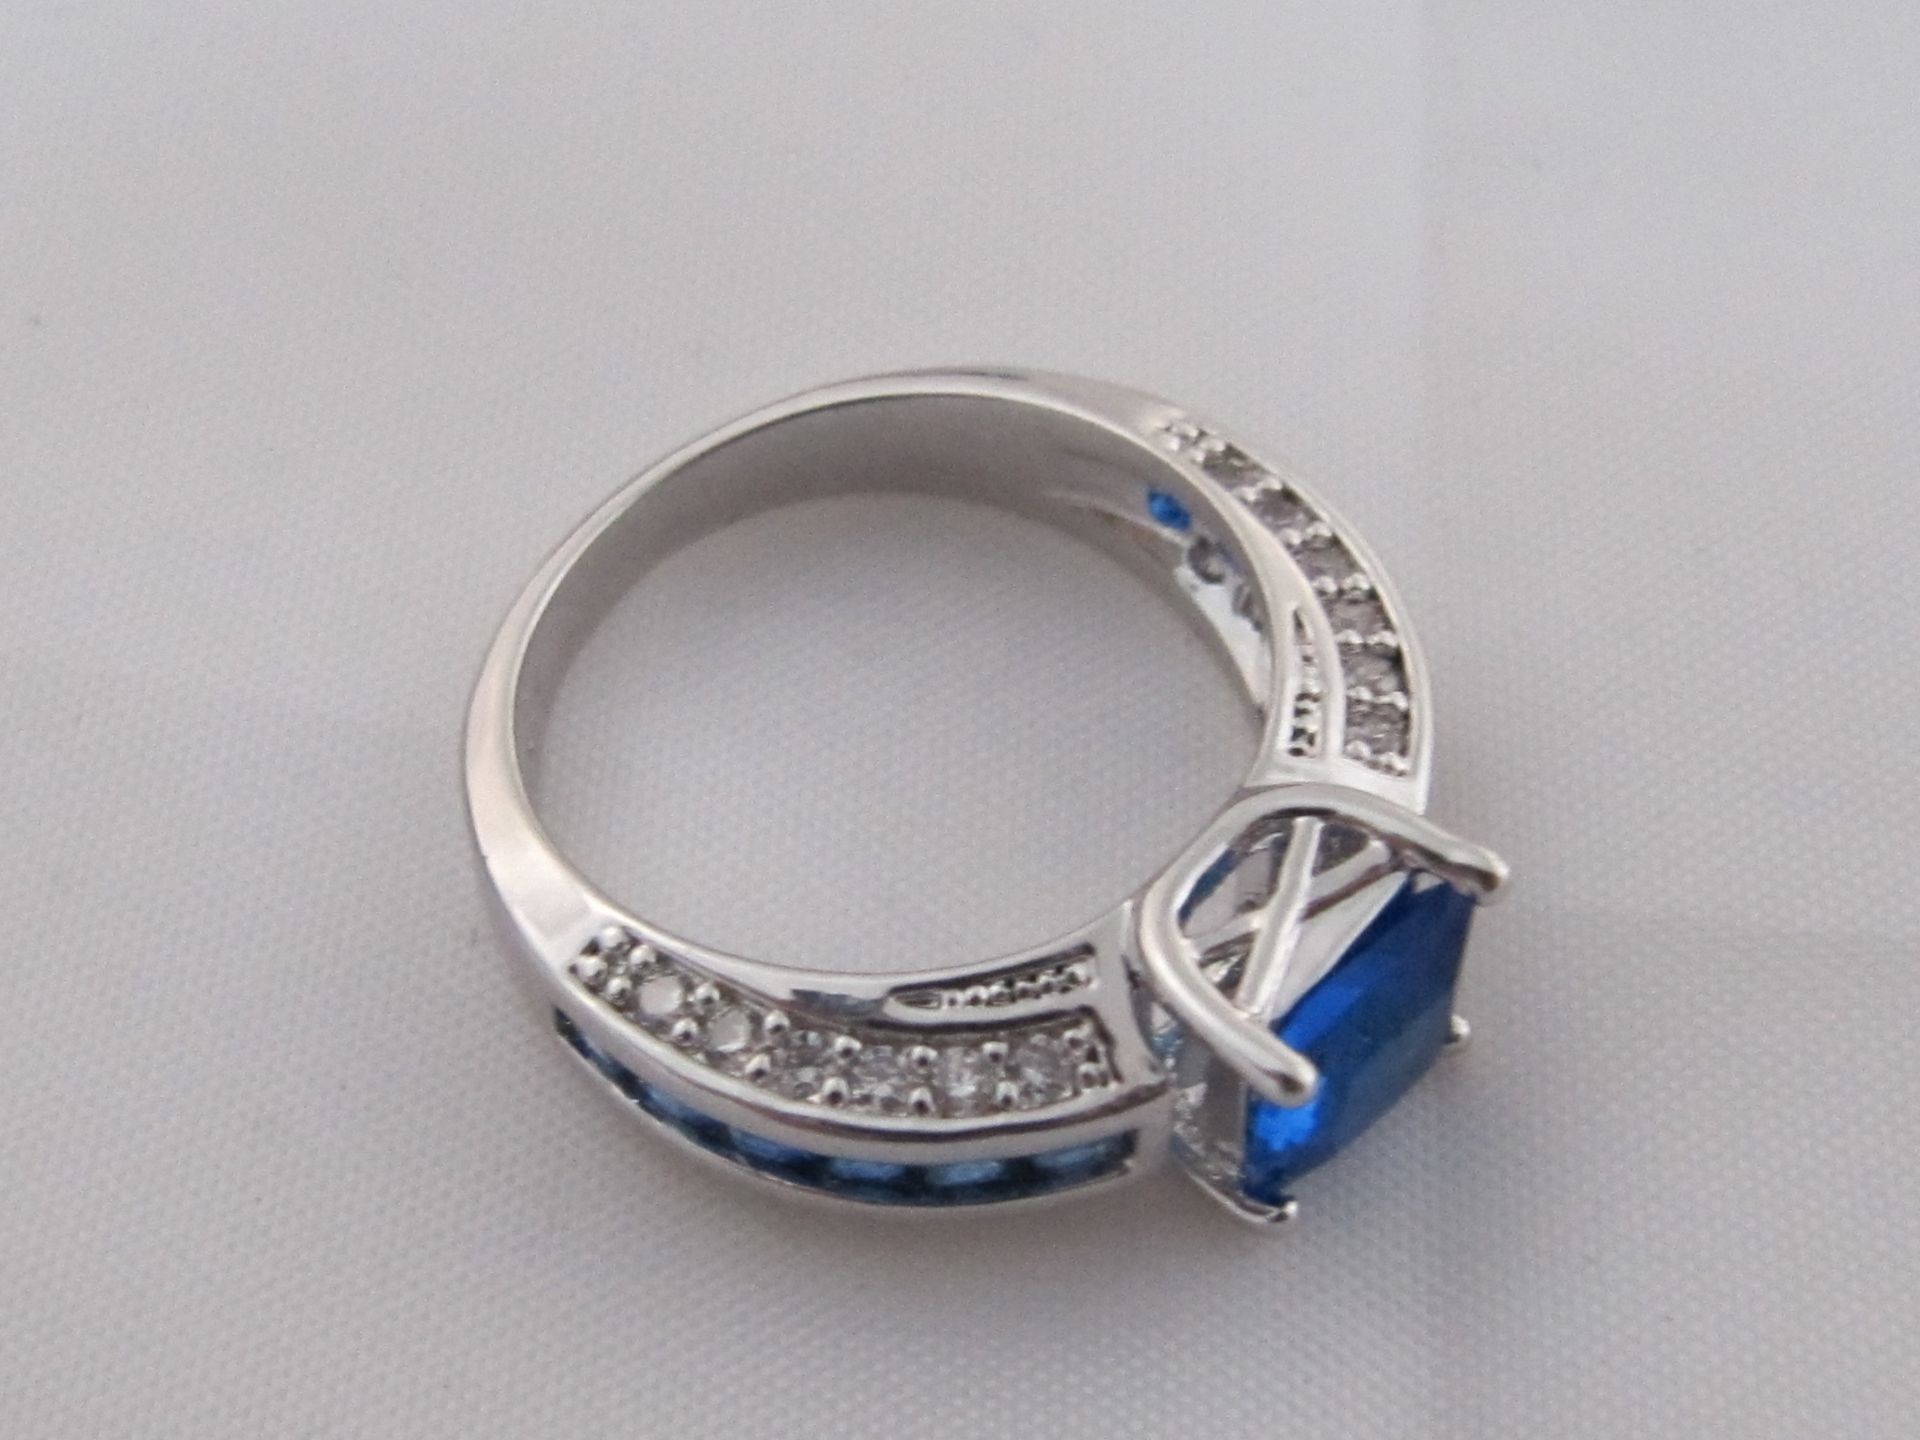 10k White Gold Filled with Blue Sapphires. Size M. - Image 2 of 5